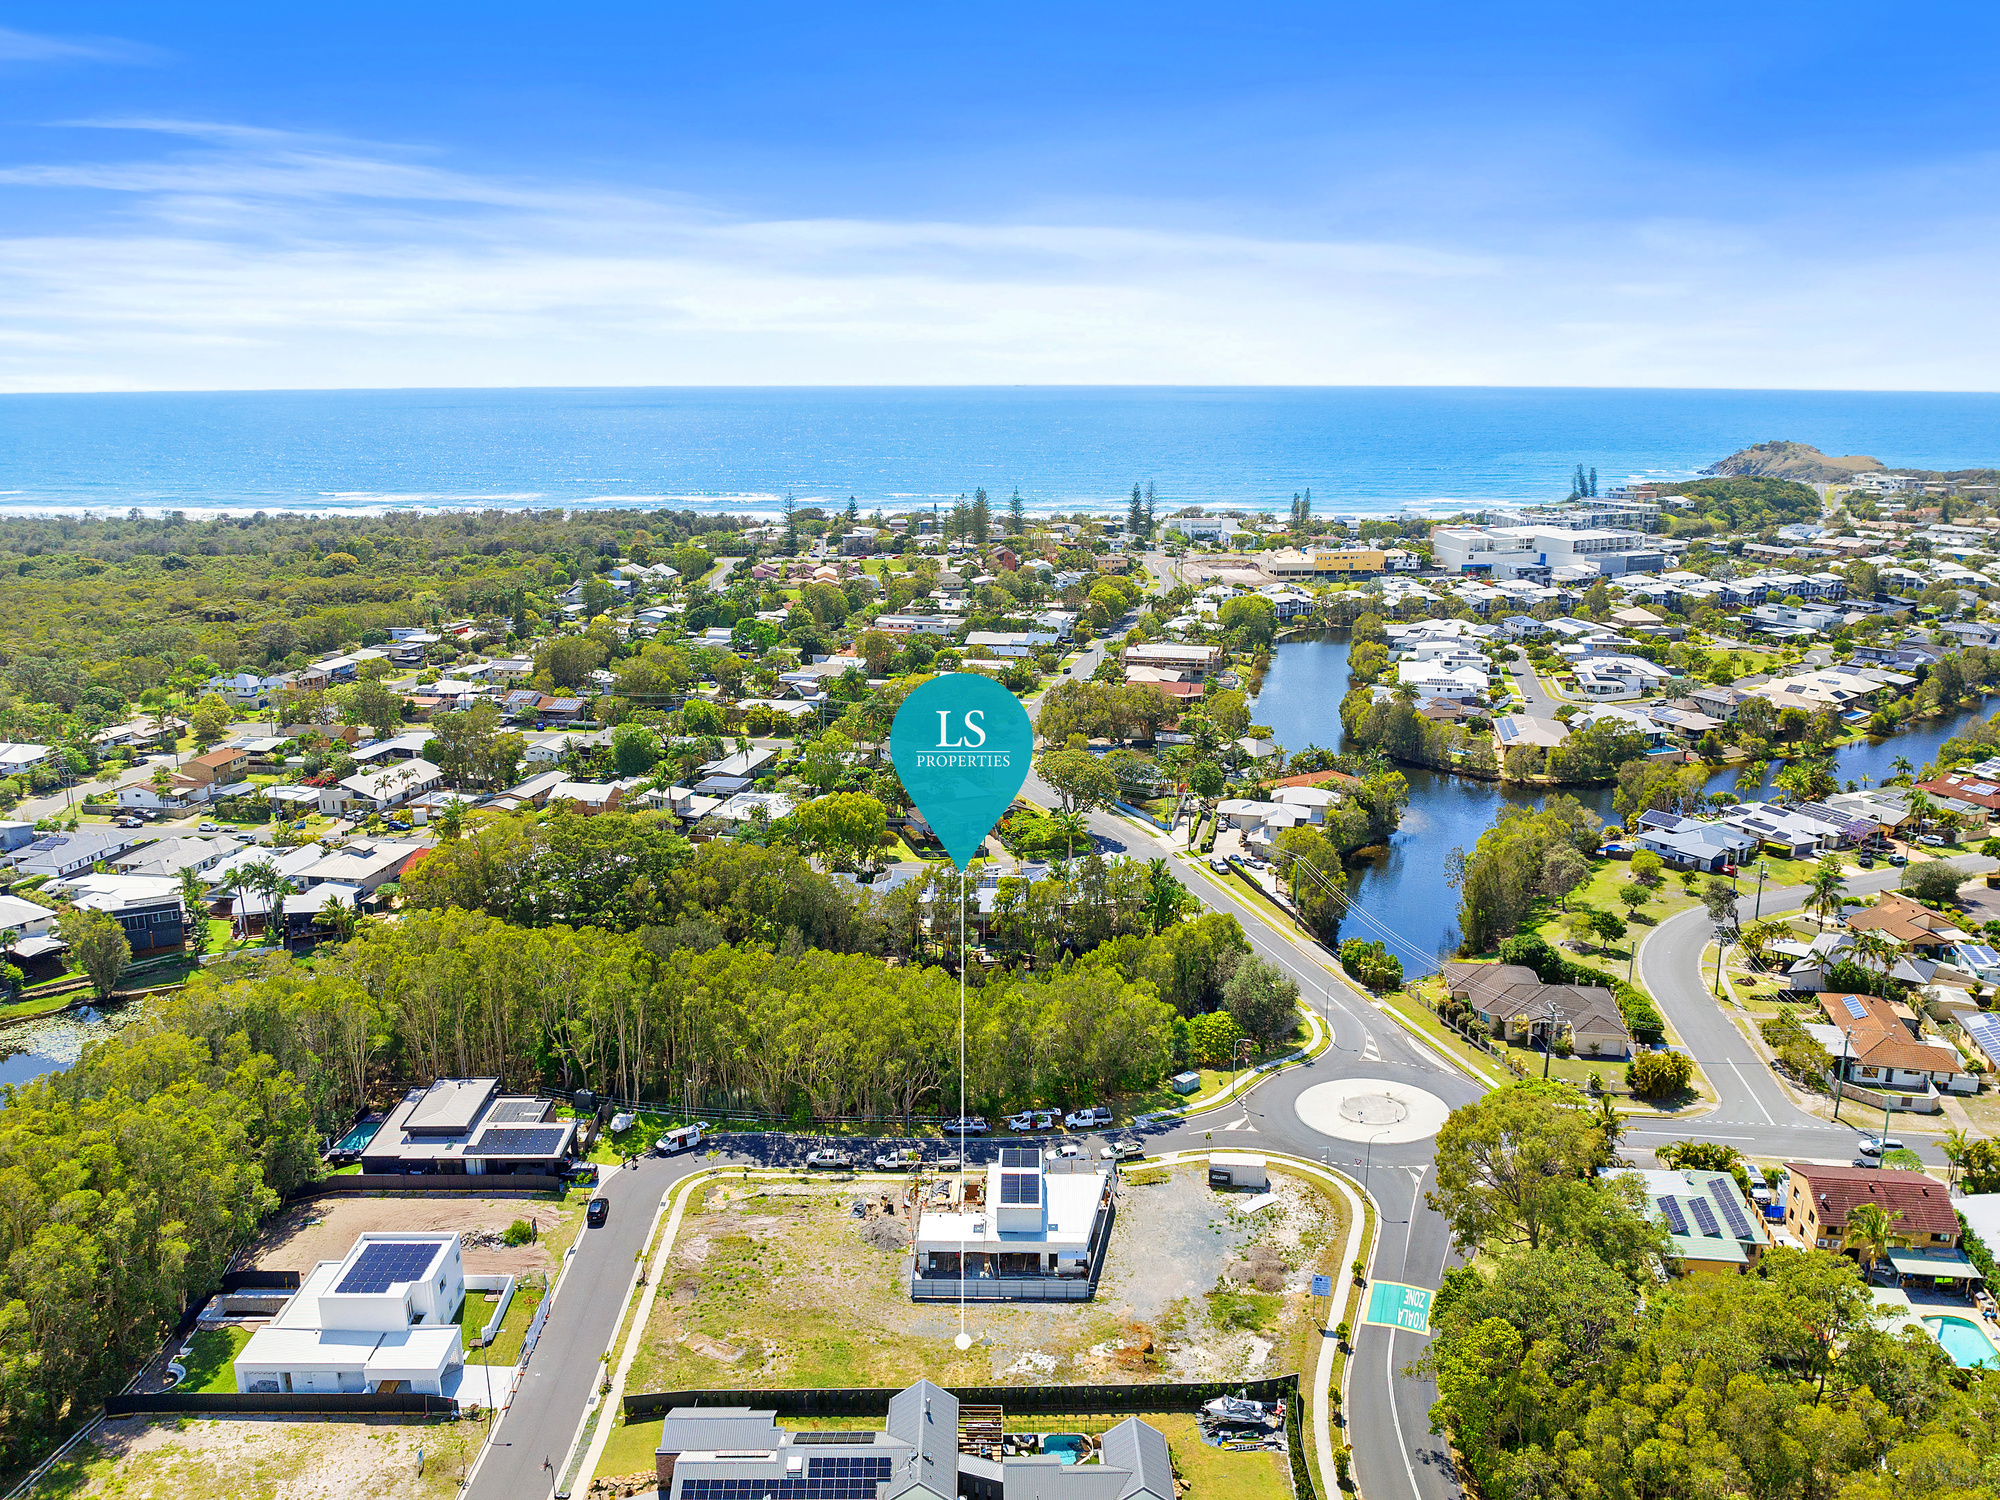  "Prime Coastal Canvas: 1,008sqm Block with DA Approved Duplex Plans, Moments from Cabarita Beach"